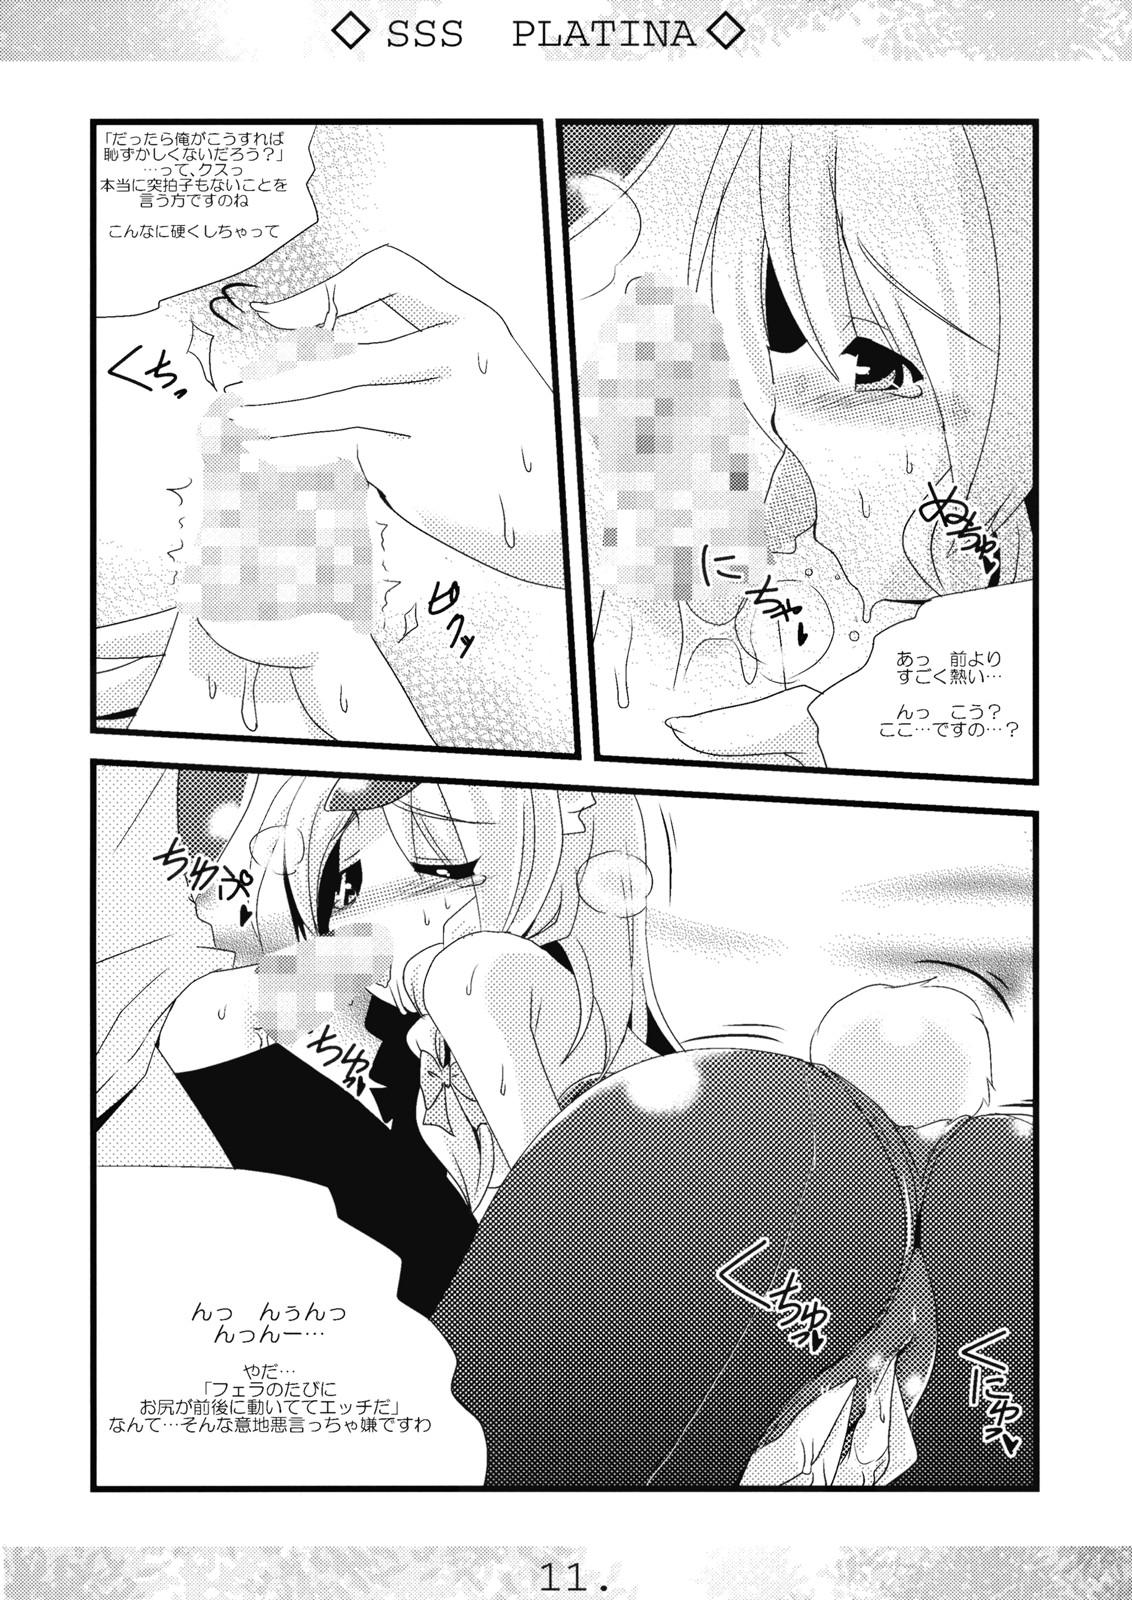 Alone SSS PLATINA - Touhou project Best Blowjob Ever - Page 11